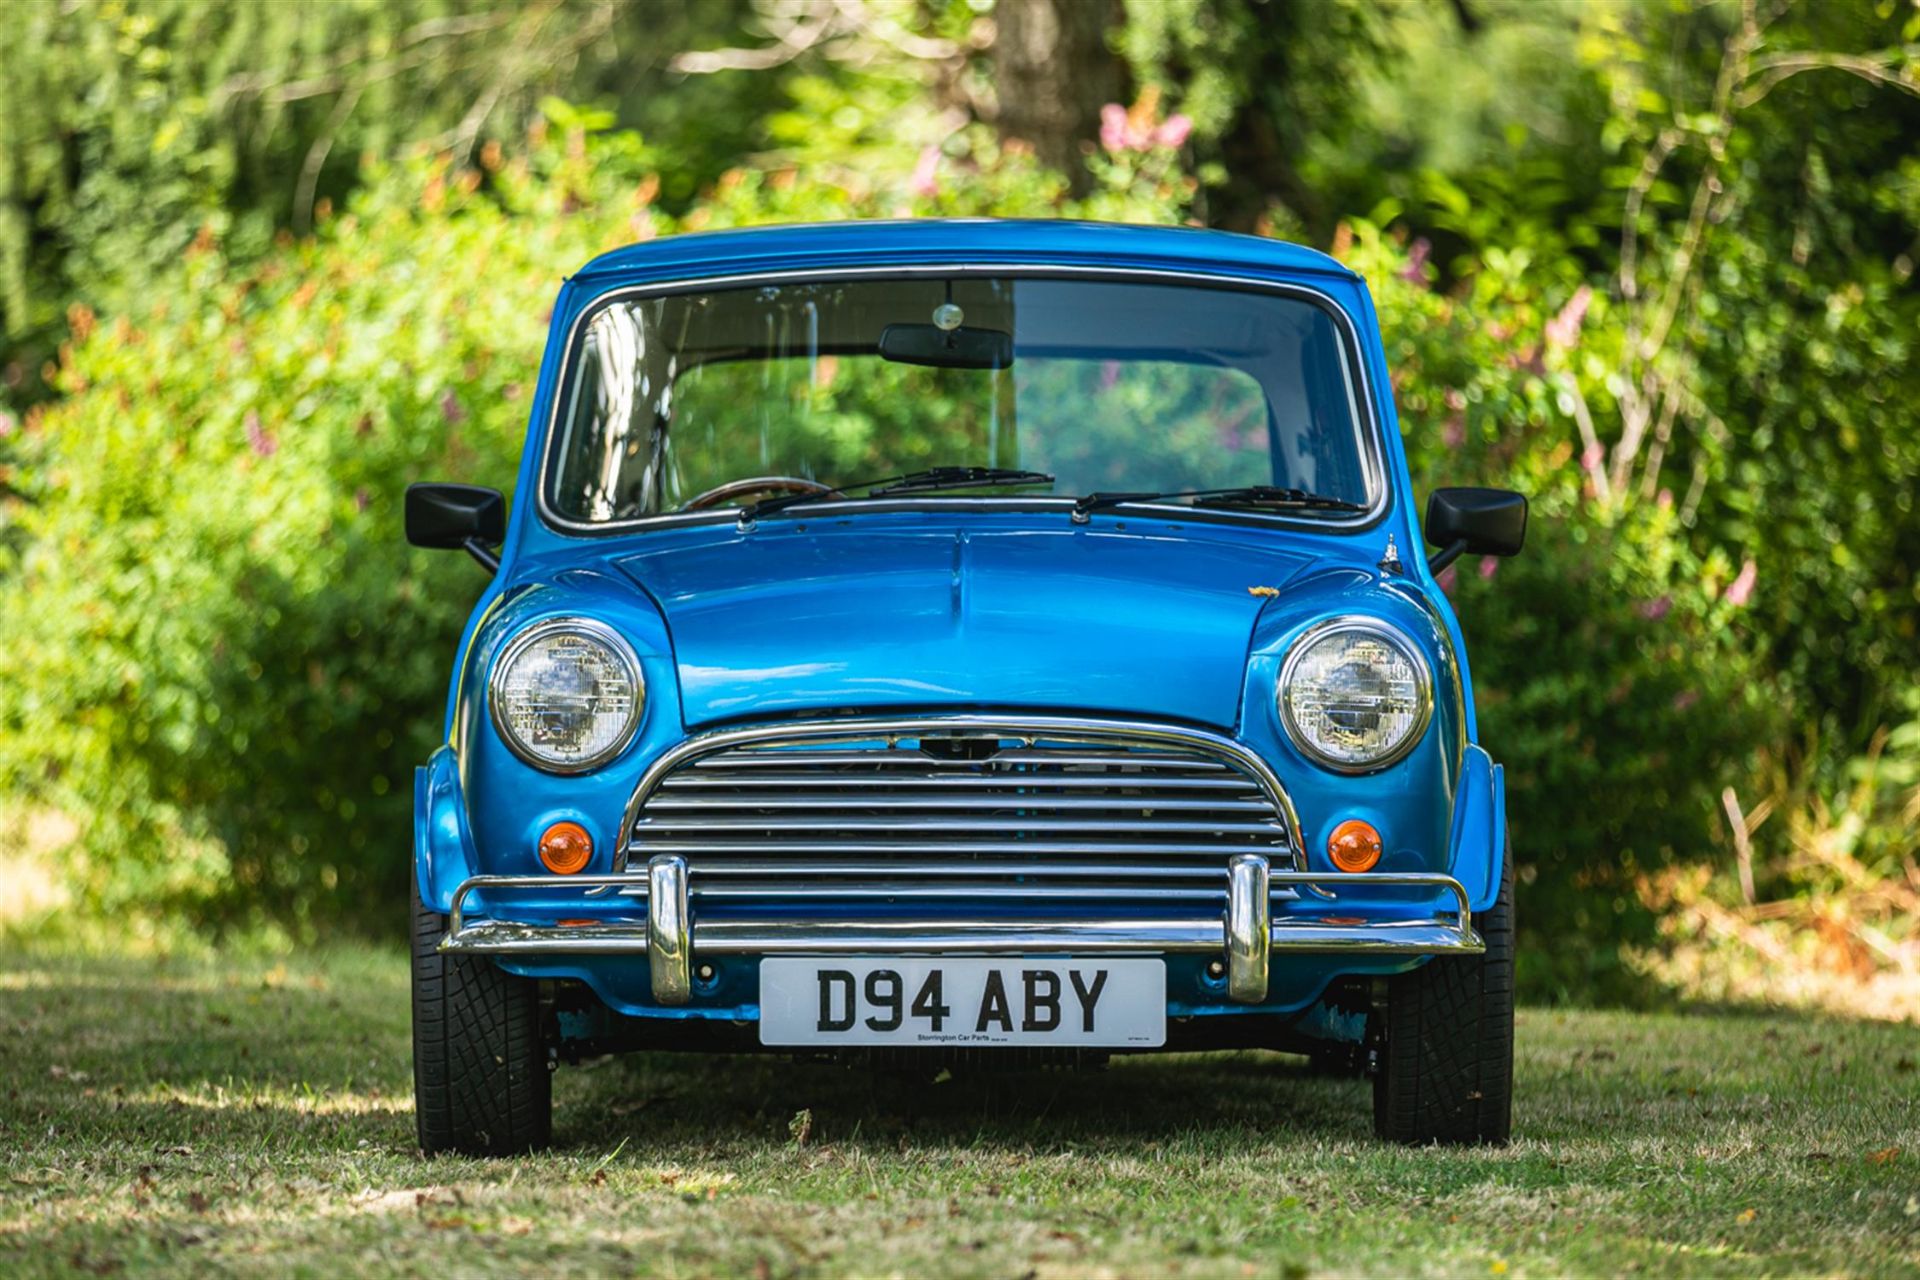 1986 Austin Mini Mayfair - 1275 Special - Image 6 of 10